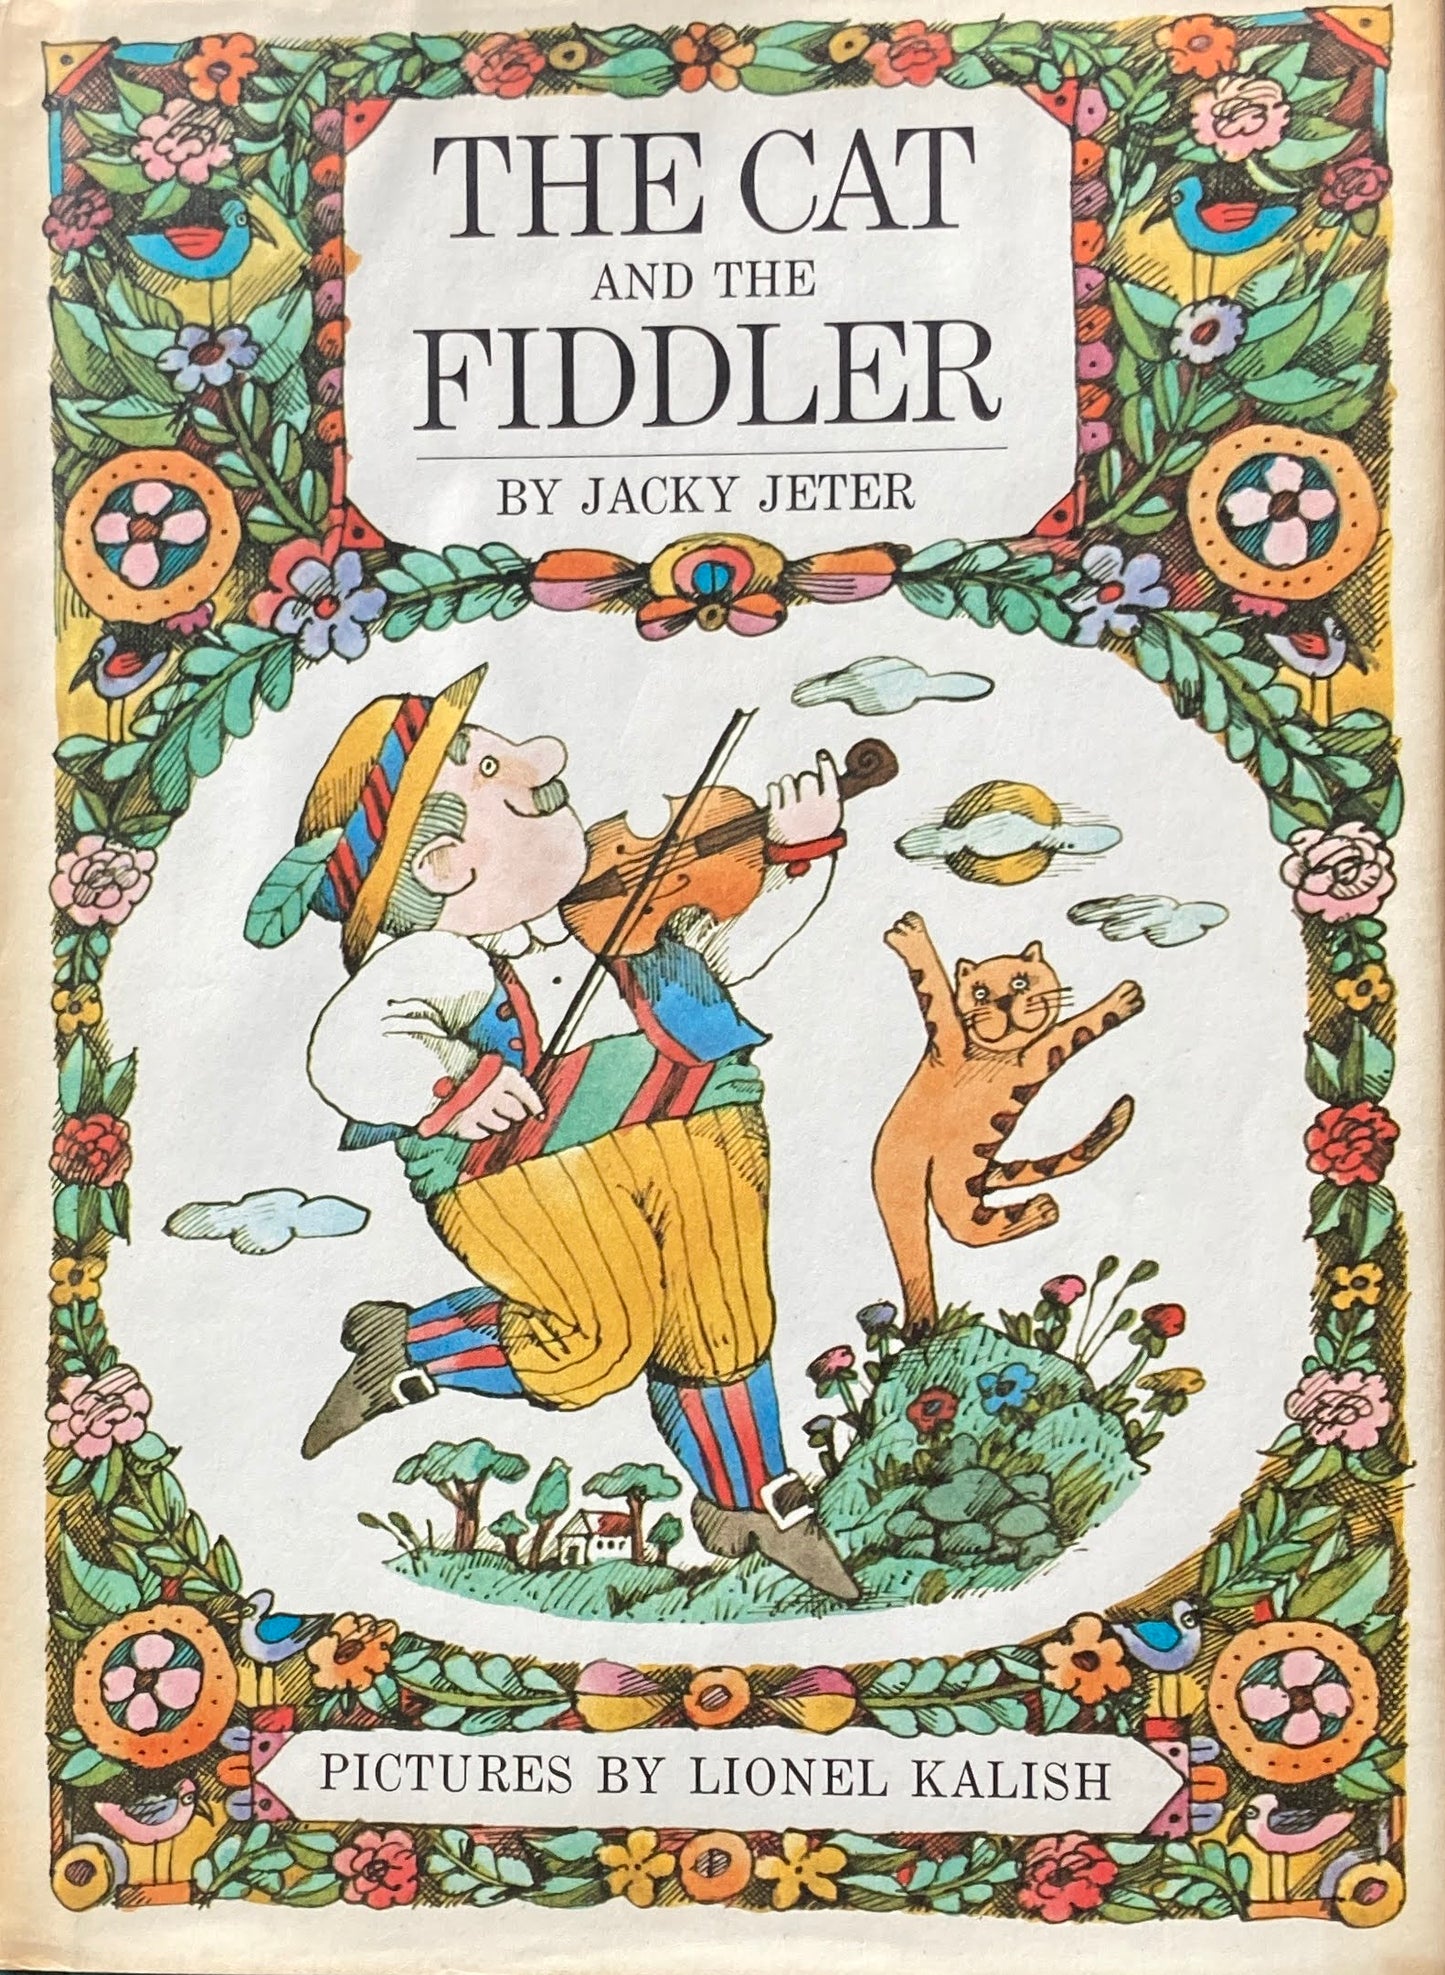 THE CAT NAD THE FIDDLER BY JACKY JETER  PICTURES BY LIONEL KALISH